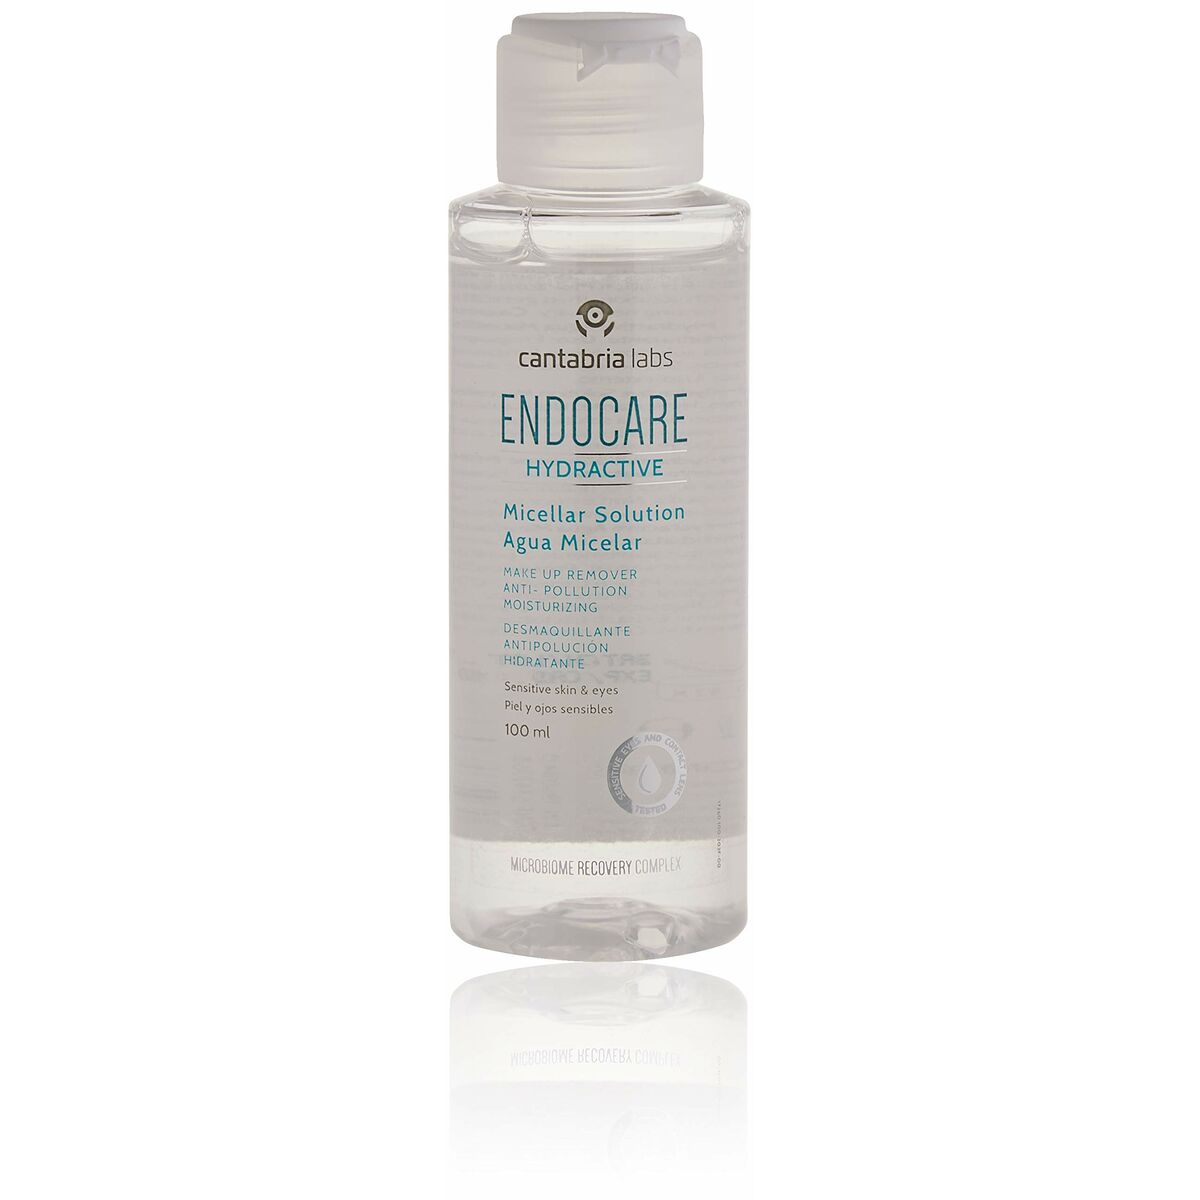 Make Up Remover Micellar Water Endocare Hydractive 100 ml | Endocare | Aylal Beauty